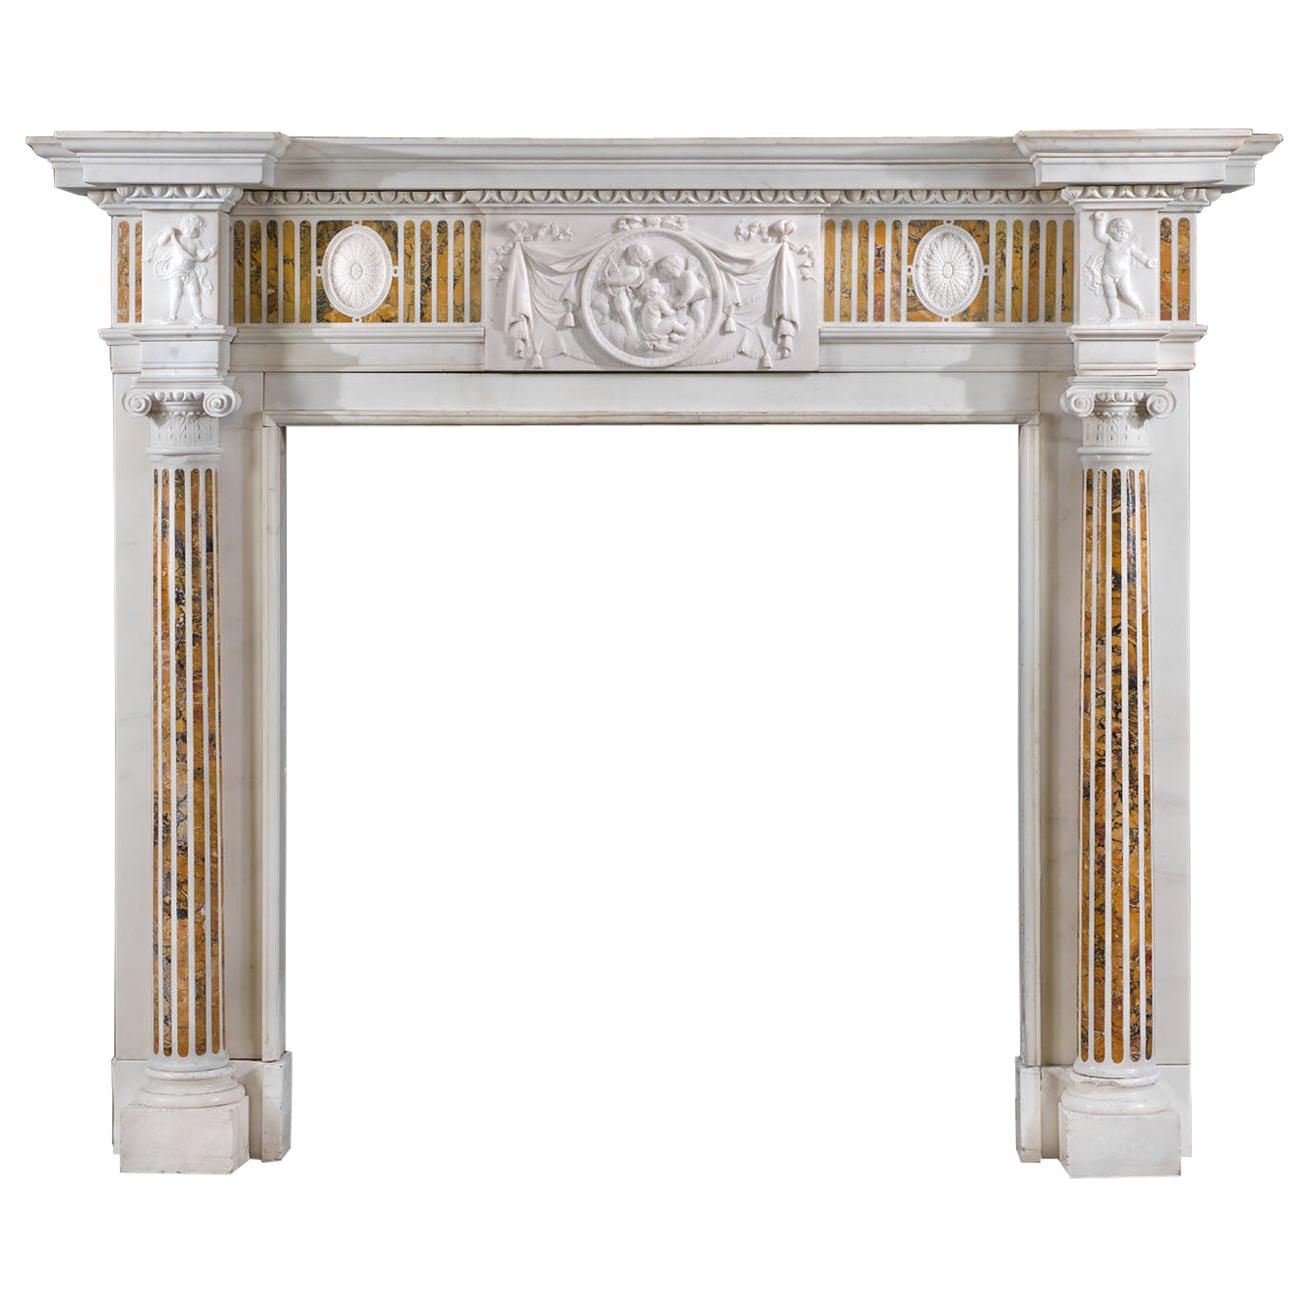 George III Statuary and Siena Marble Column Fireplace For Sale